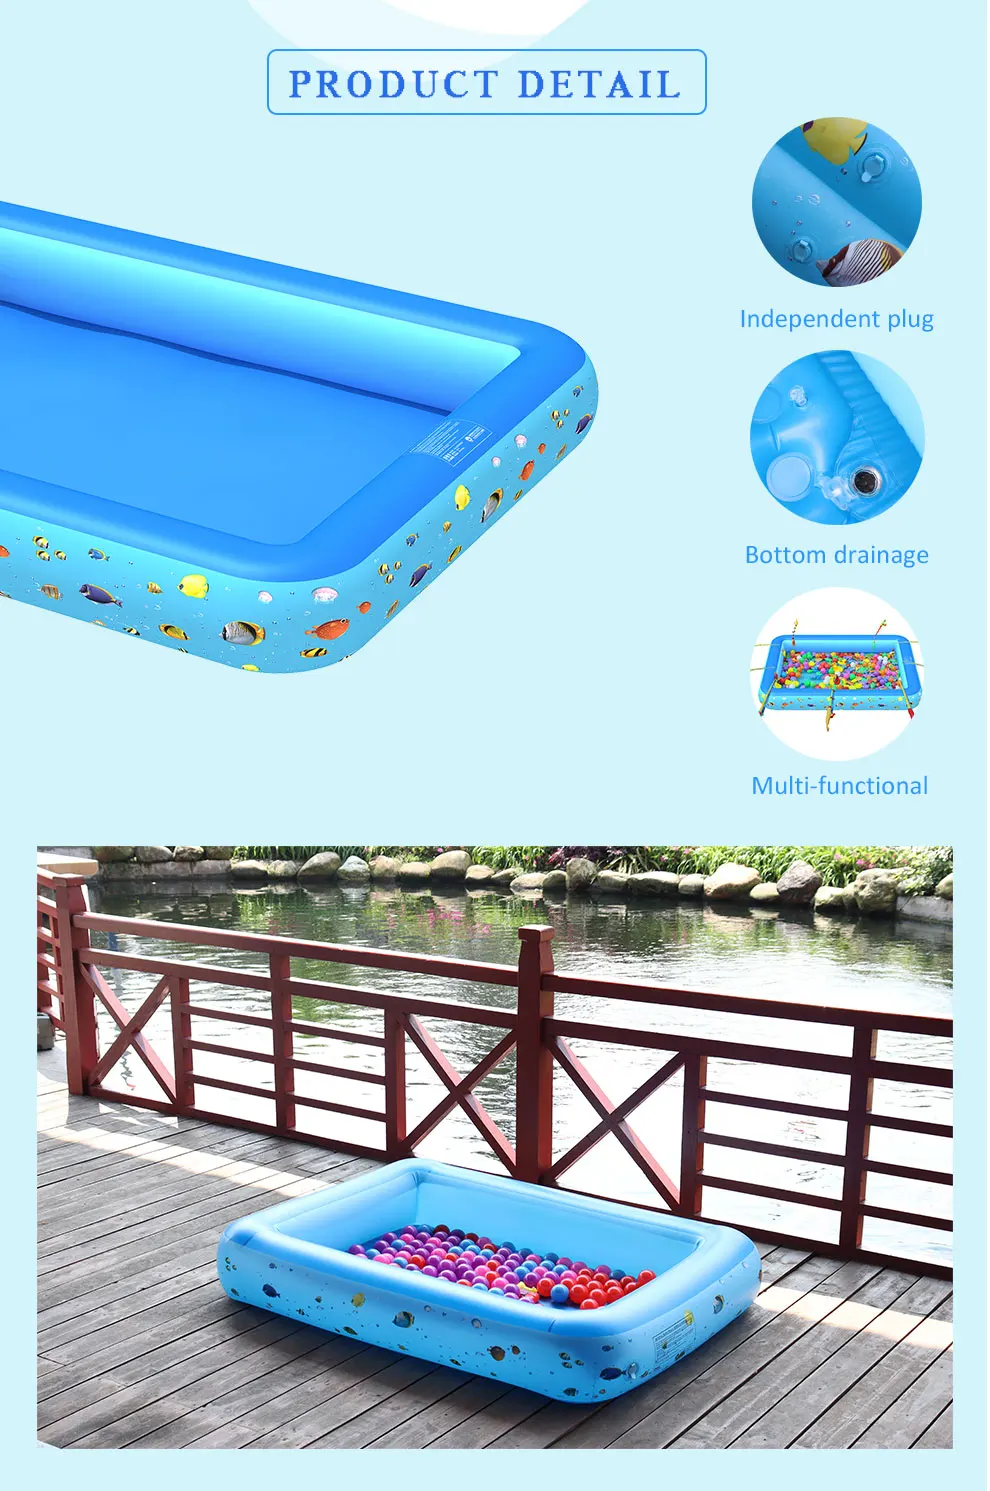 large size 1 Ring portable pool,inflatable backyard children water play pool for homely entertain 210cm length